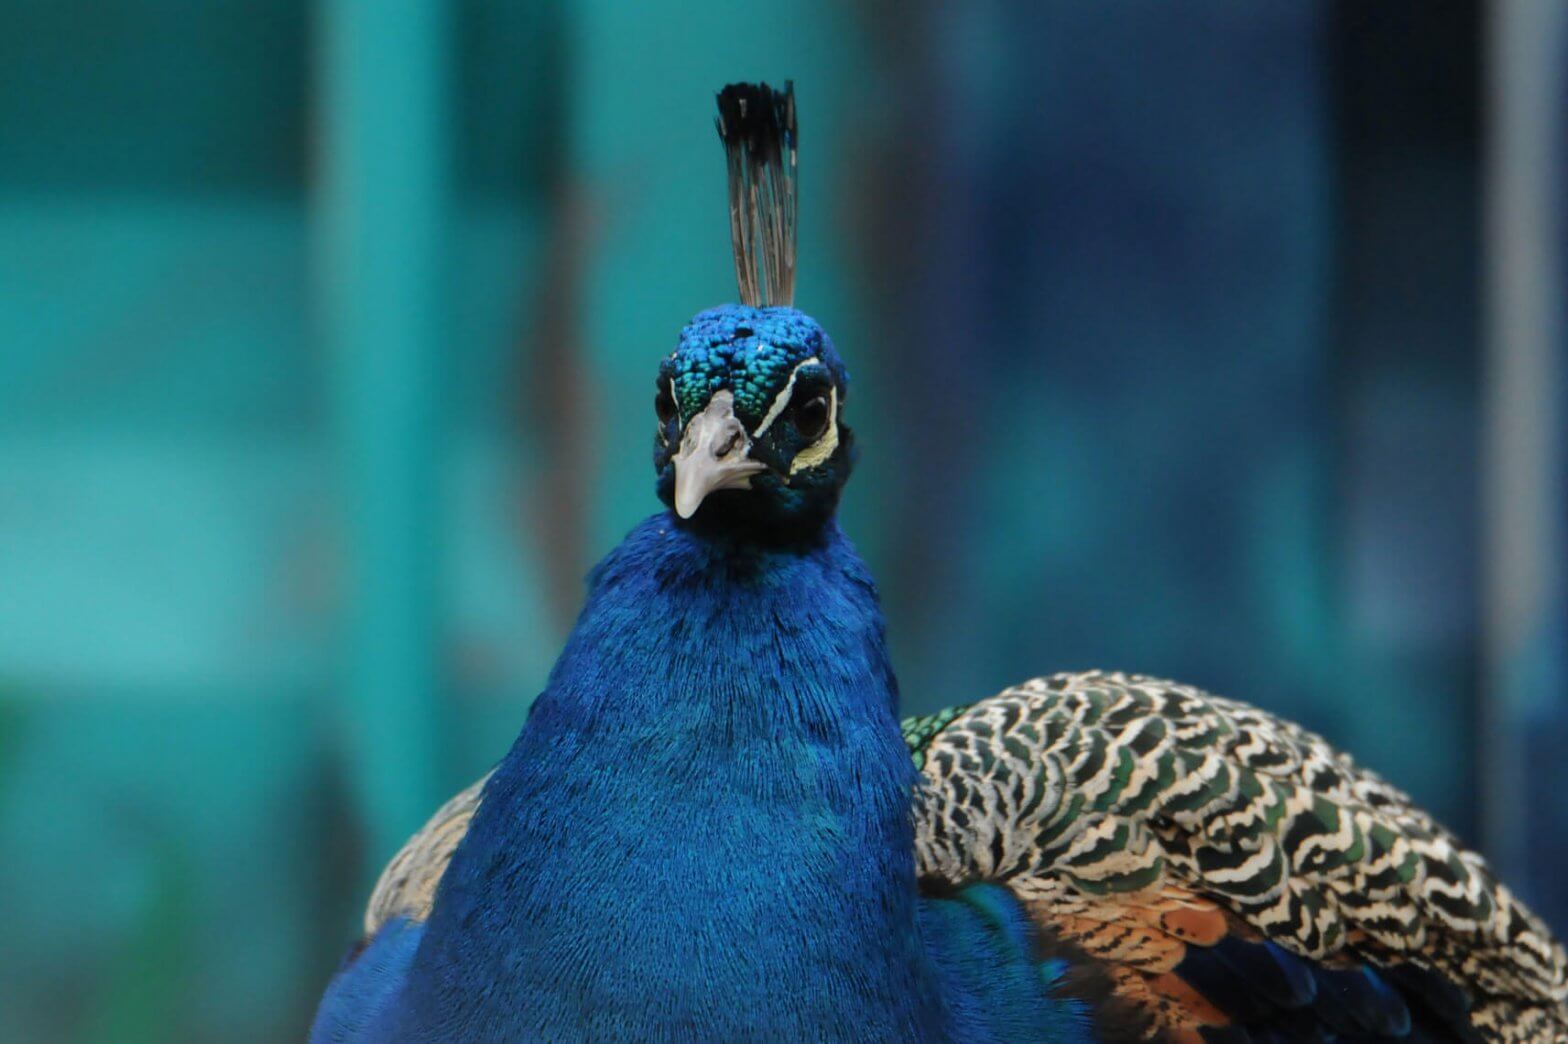 Our education groups will bring you face to face with our peacocks